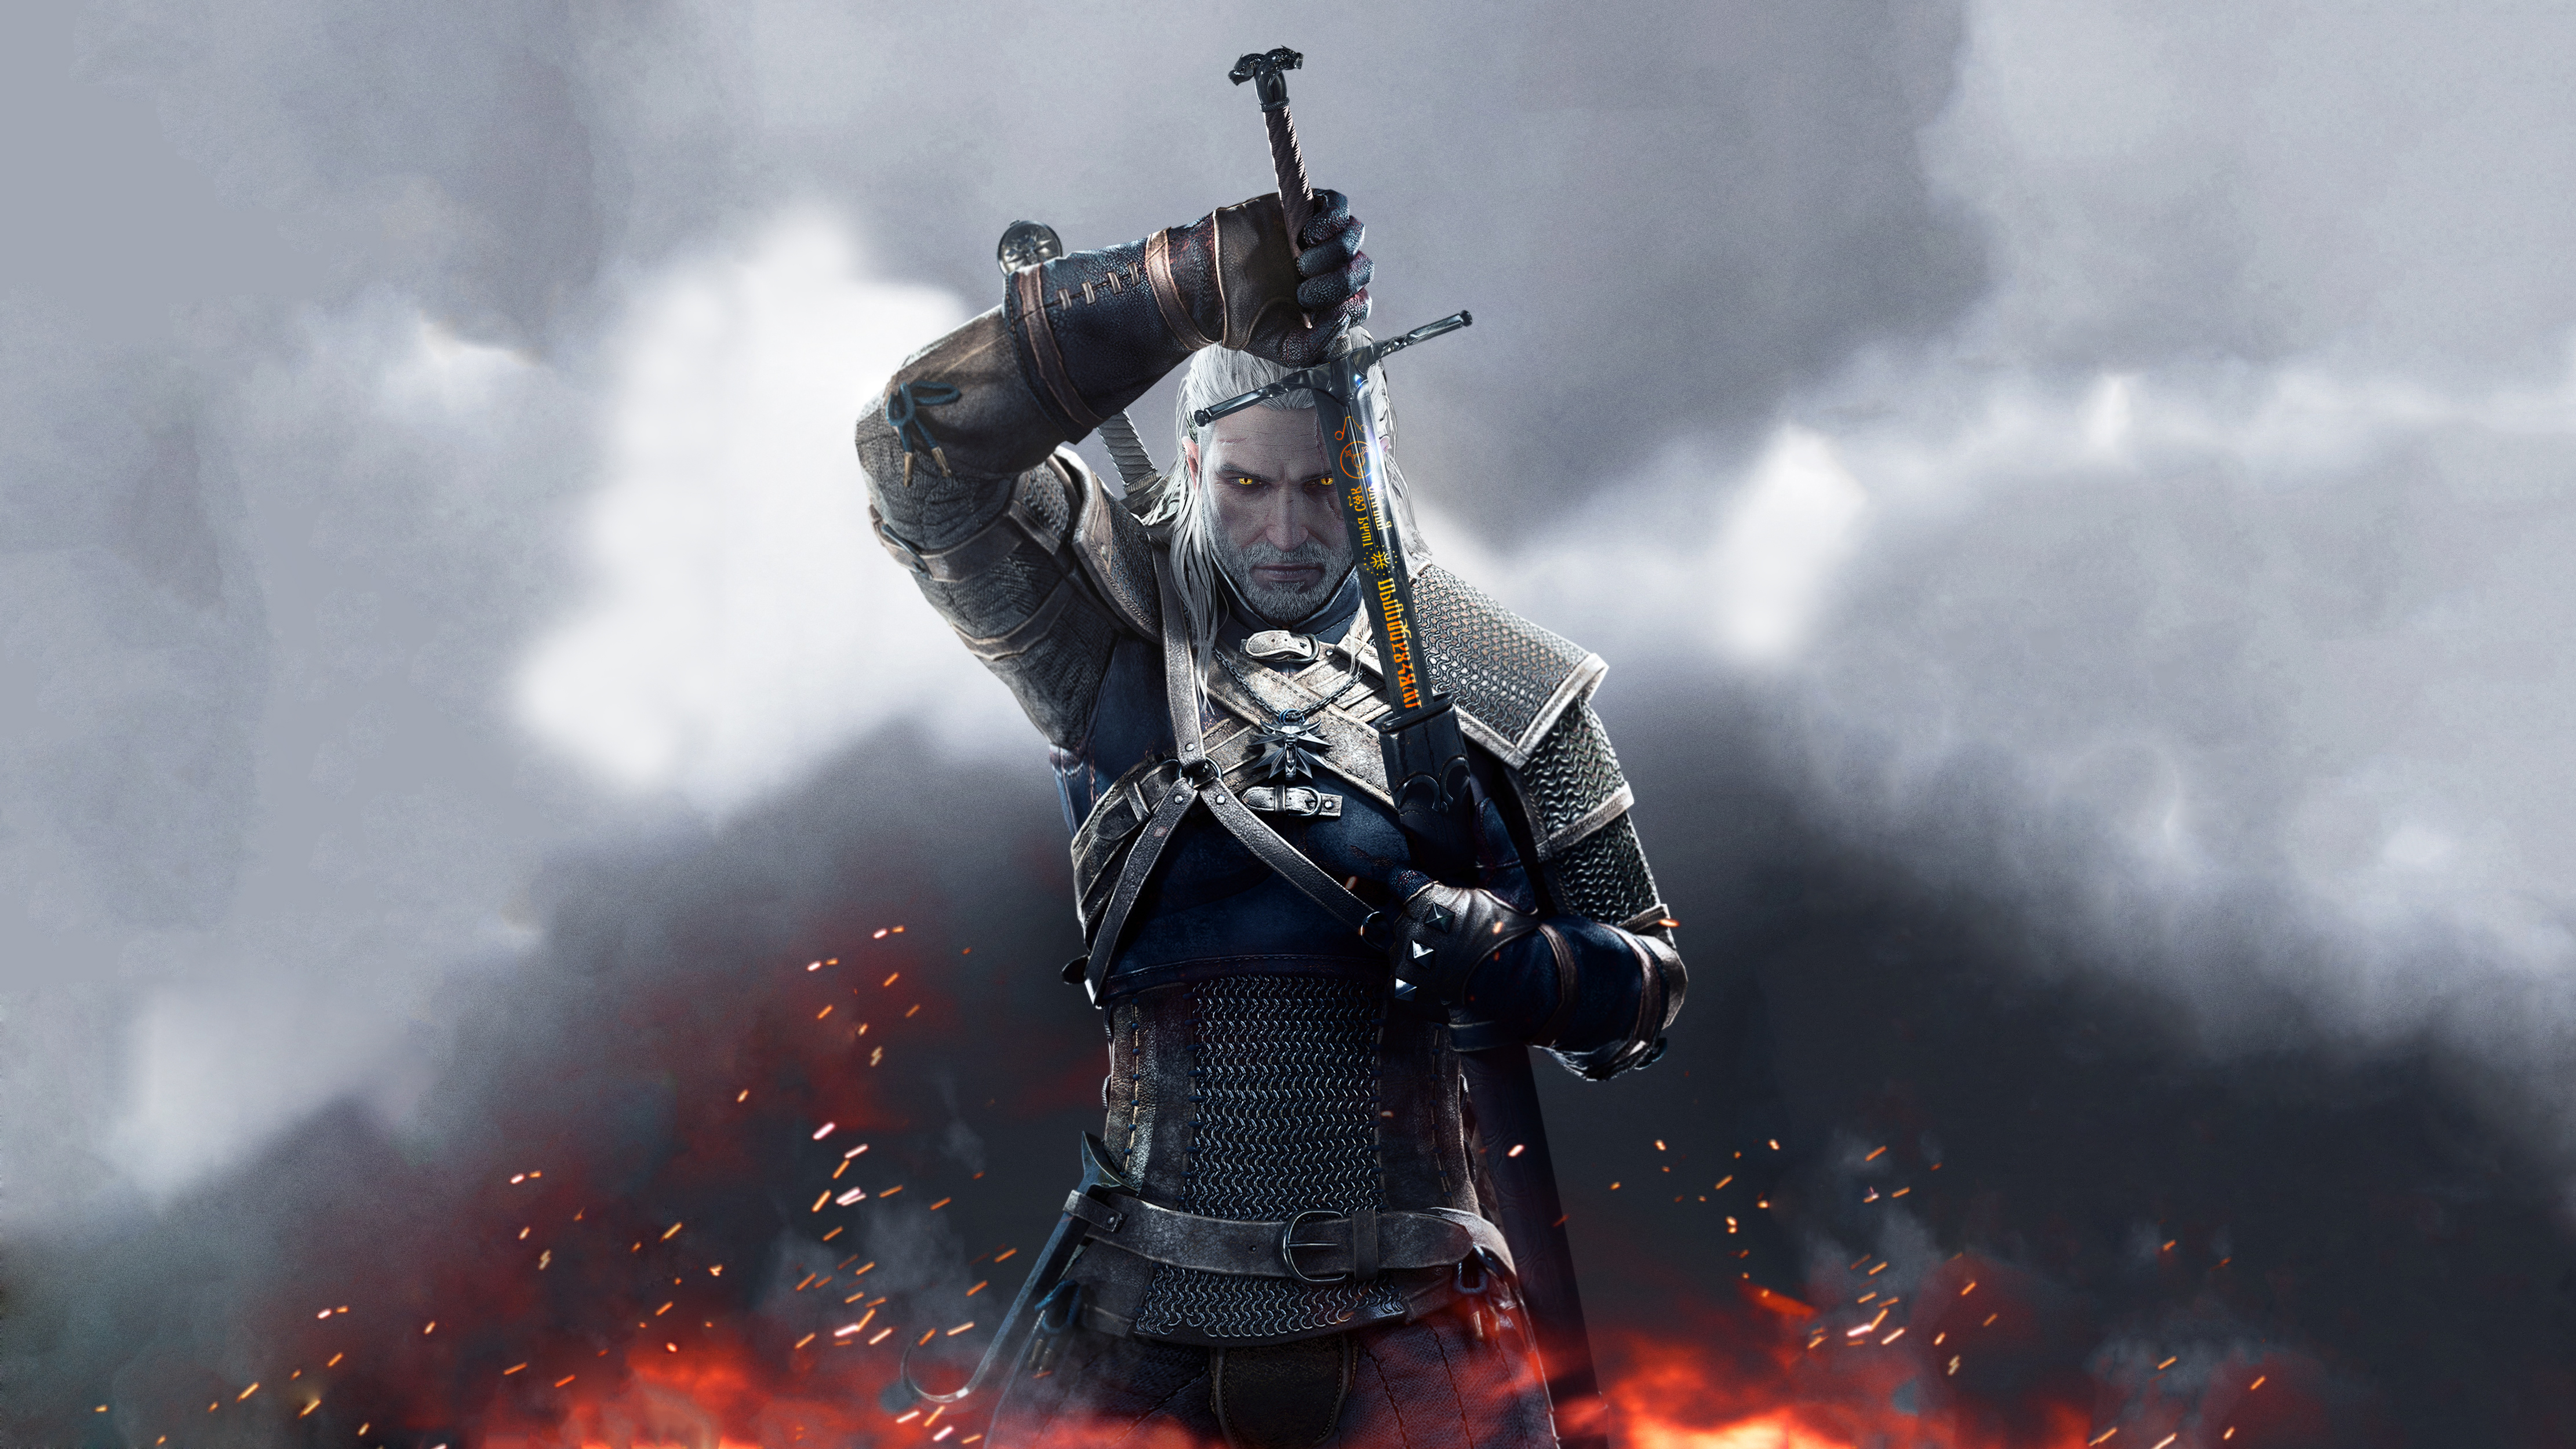 The Witcher 3 wallpapers, Pictures, Images